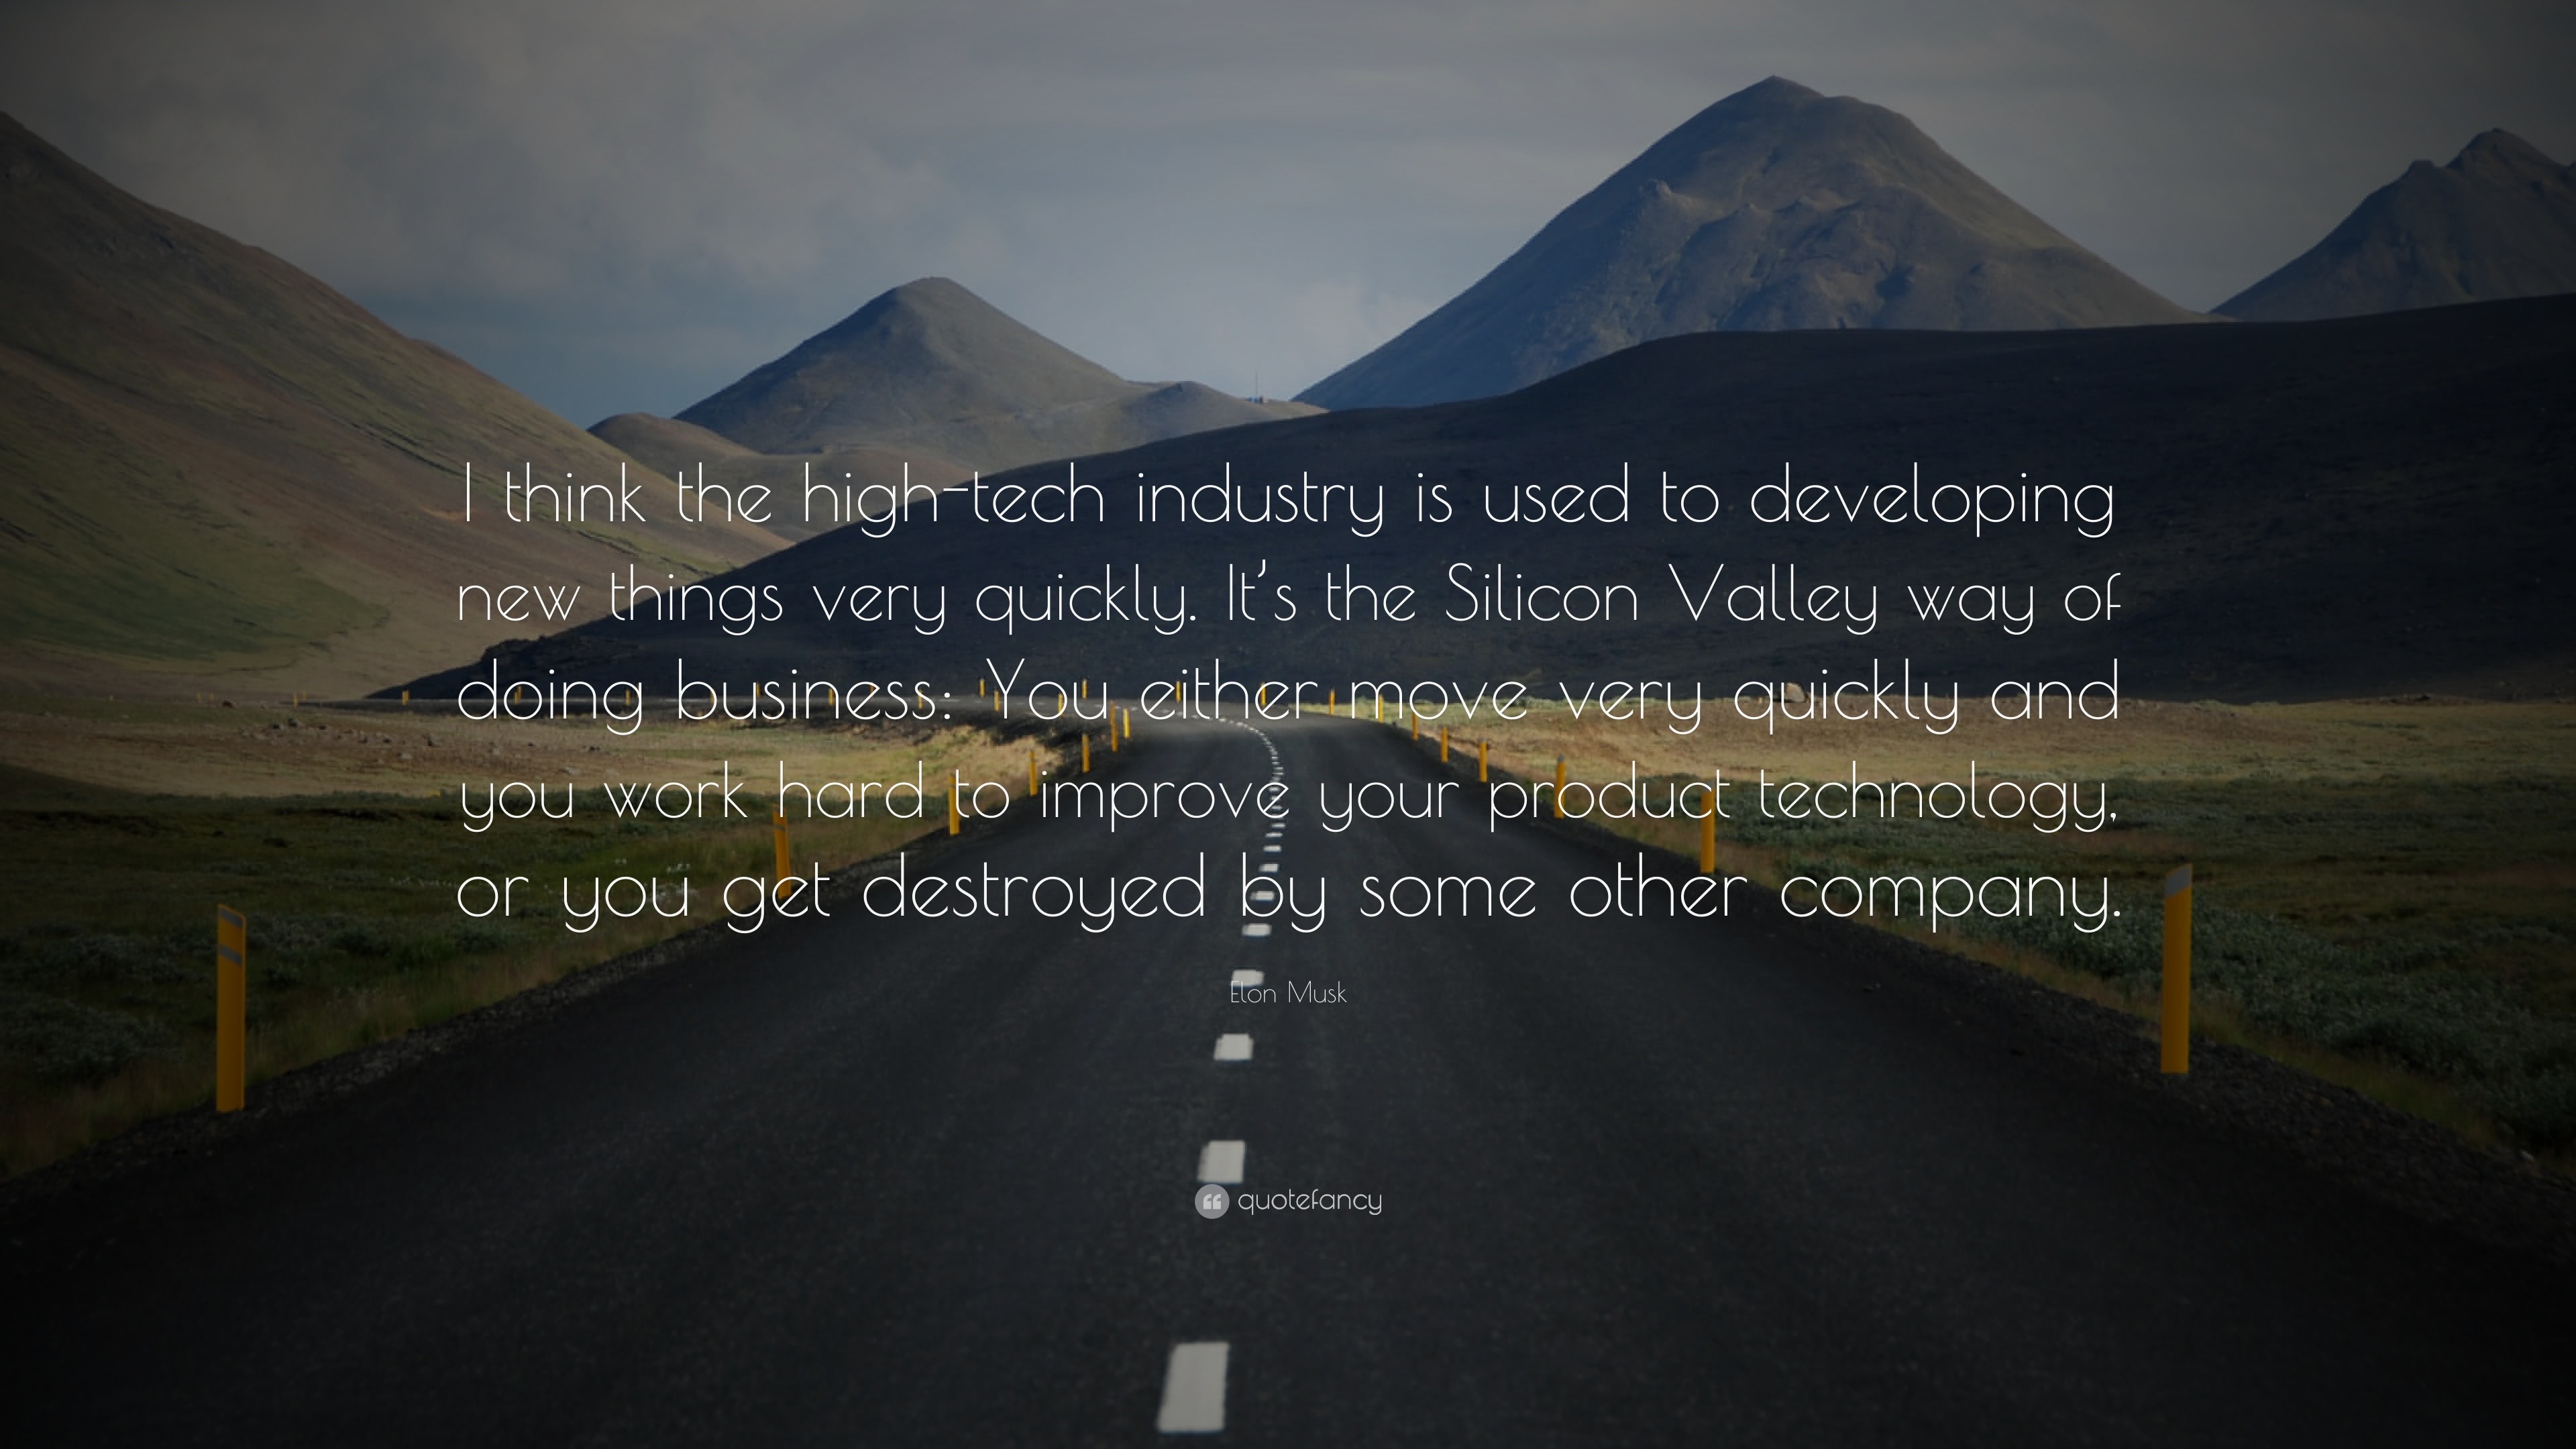 3840x2160 Elon Musk Quote: “I think the high-tech industry is used to developing